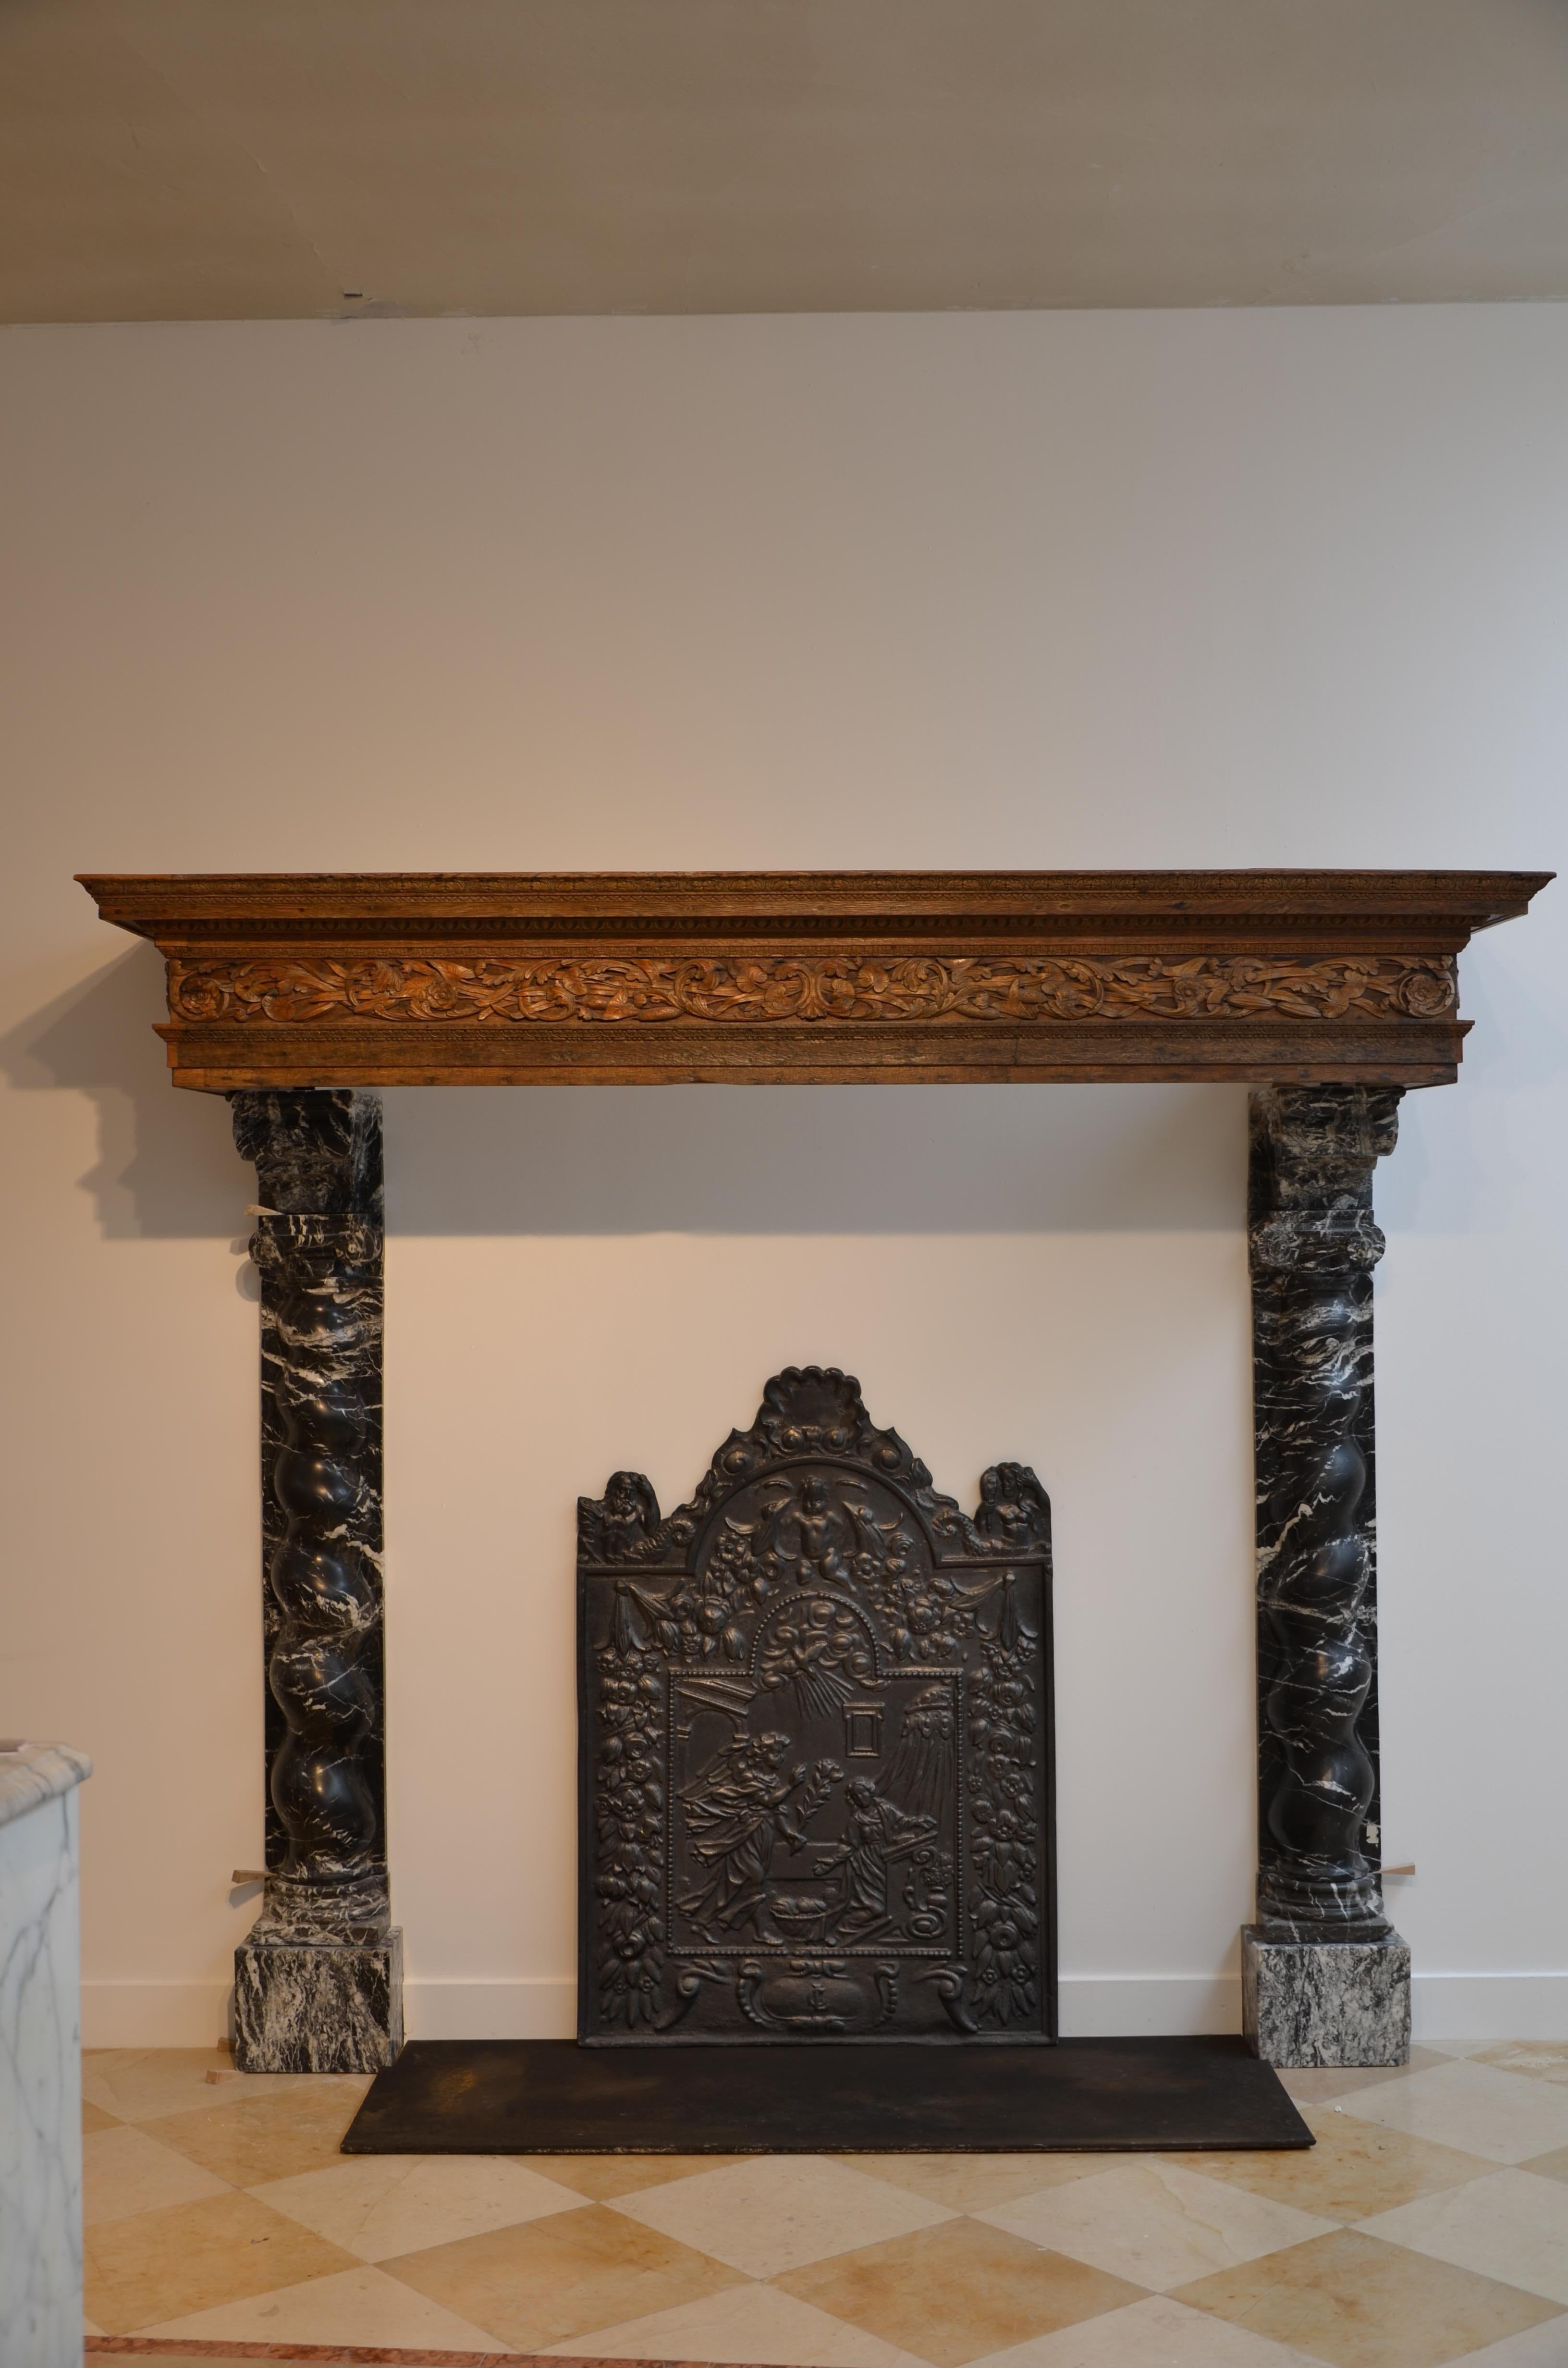 Large and amazing Baroque Dutch mantelpiece from the 17th century.
Very well decorated limewood frieze displays an array of beautiful water plants, supported by black and white veined marble jambs. Cast iron floor and fireback finish this mantel